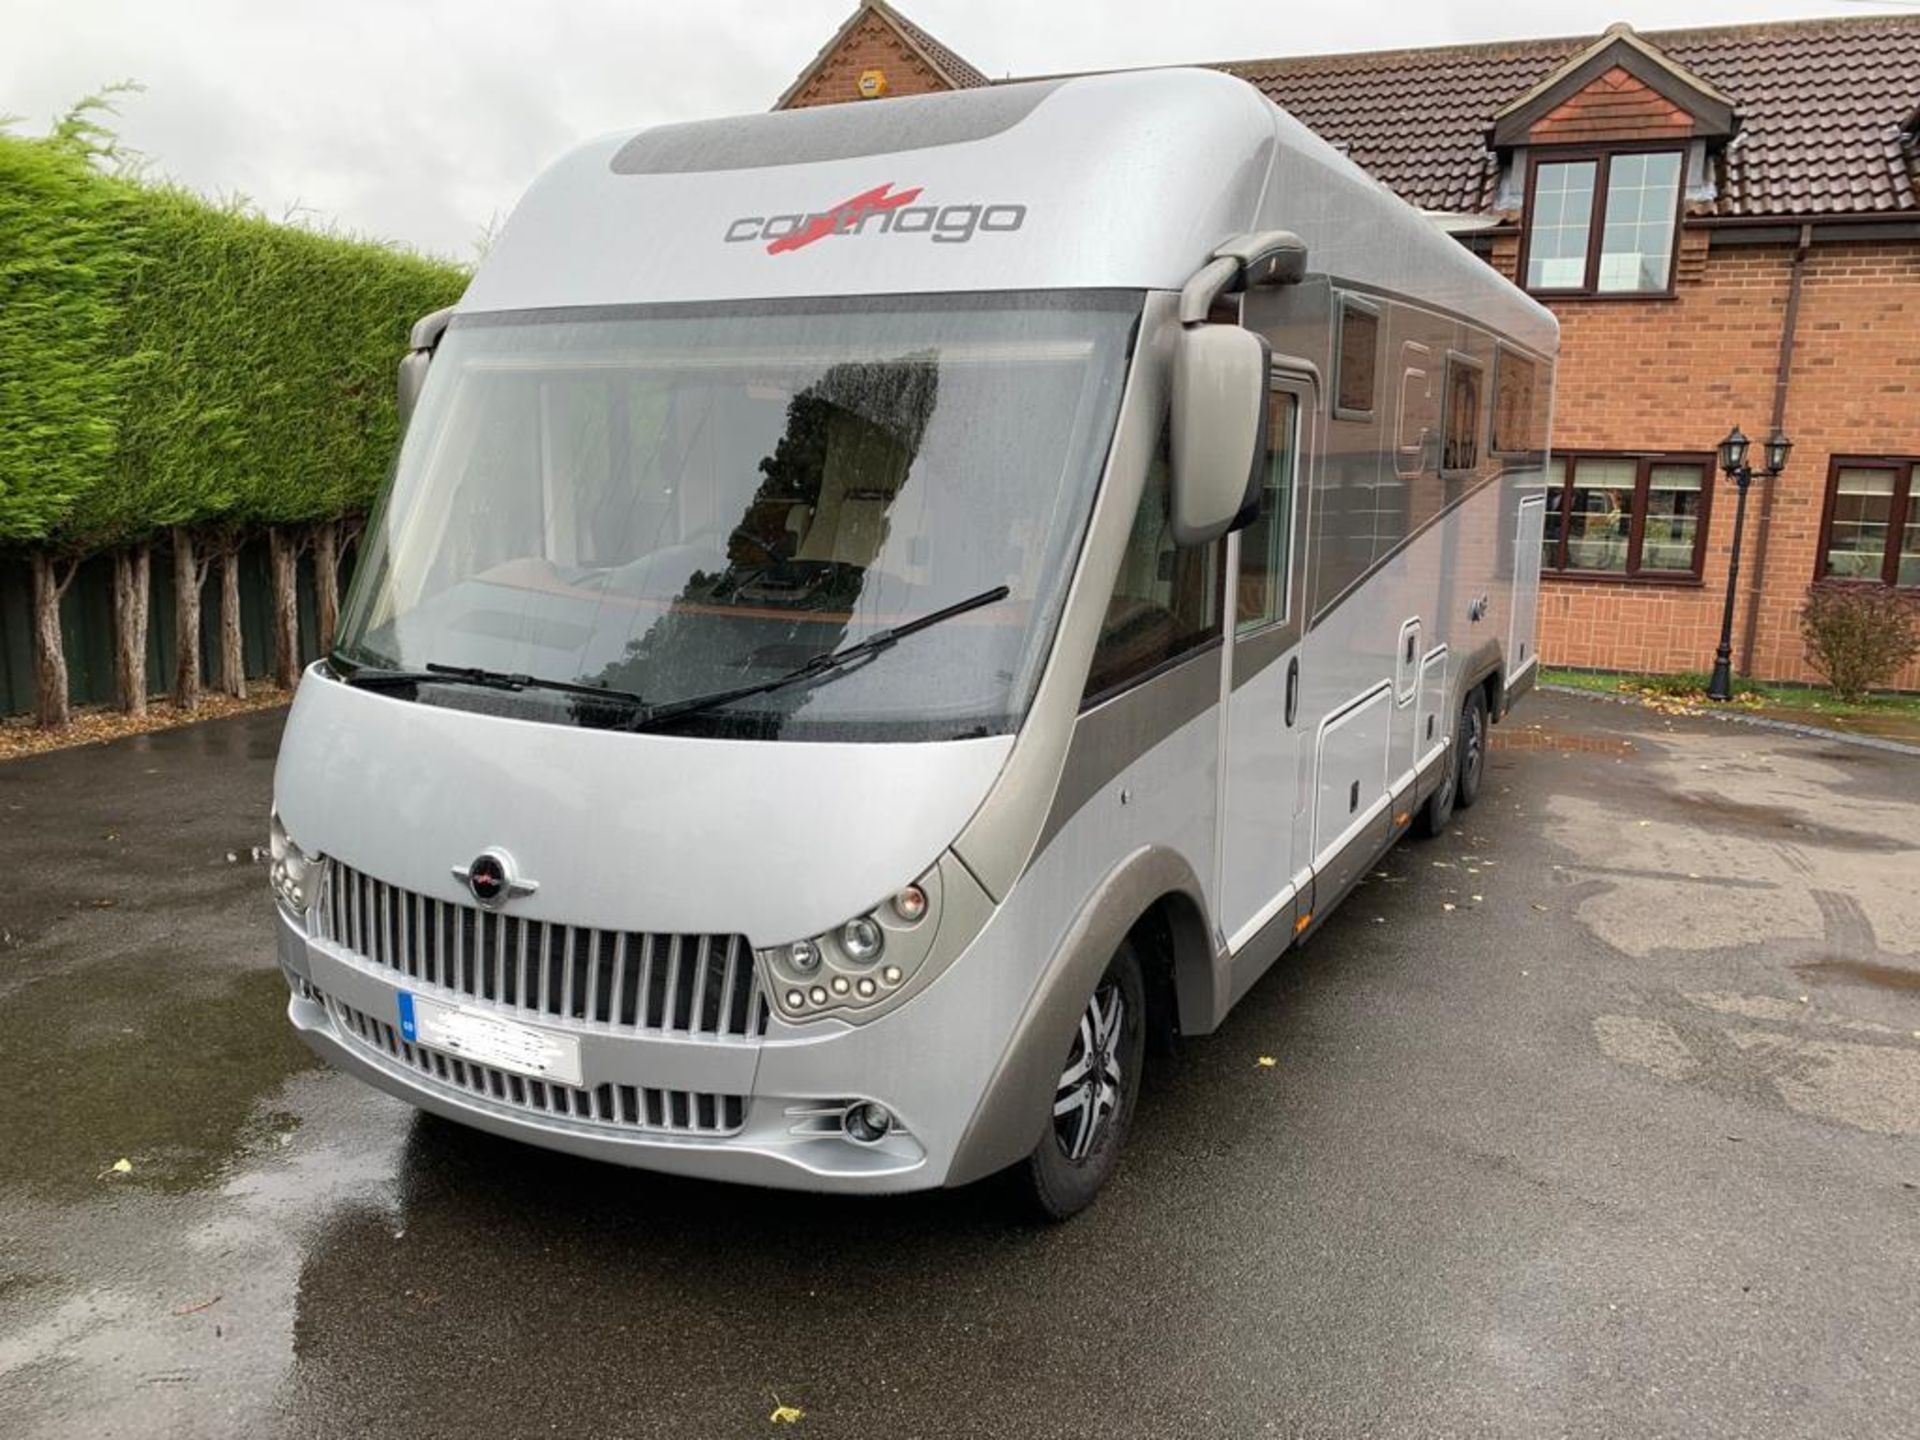 2020 CARTHAGO LINER-FOR-TWO 53L MOTORHOME 11 mths WARRANTY 4529 MILES, MINT CONDITION NO VAT - Image 2 of 38